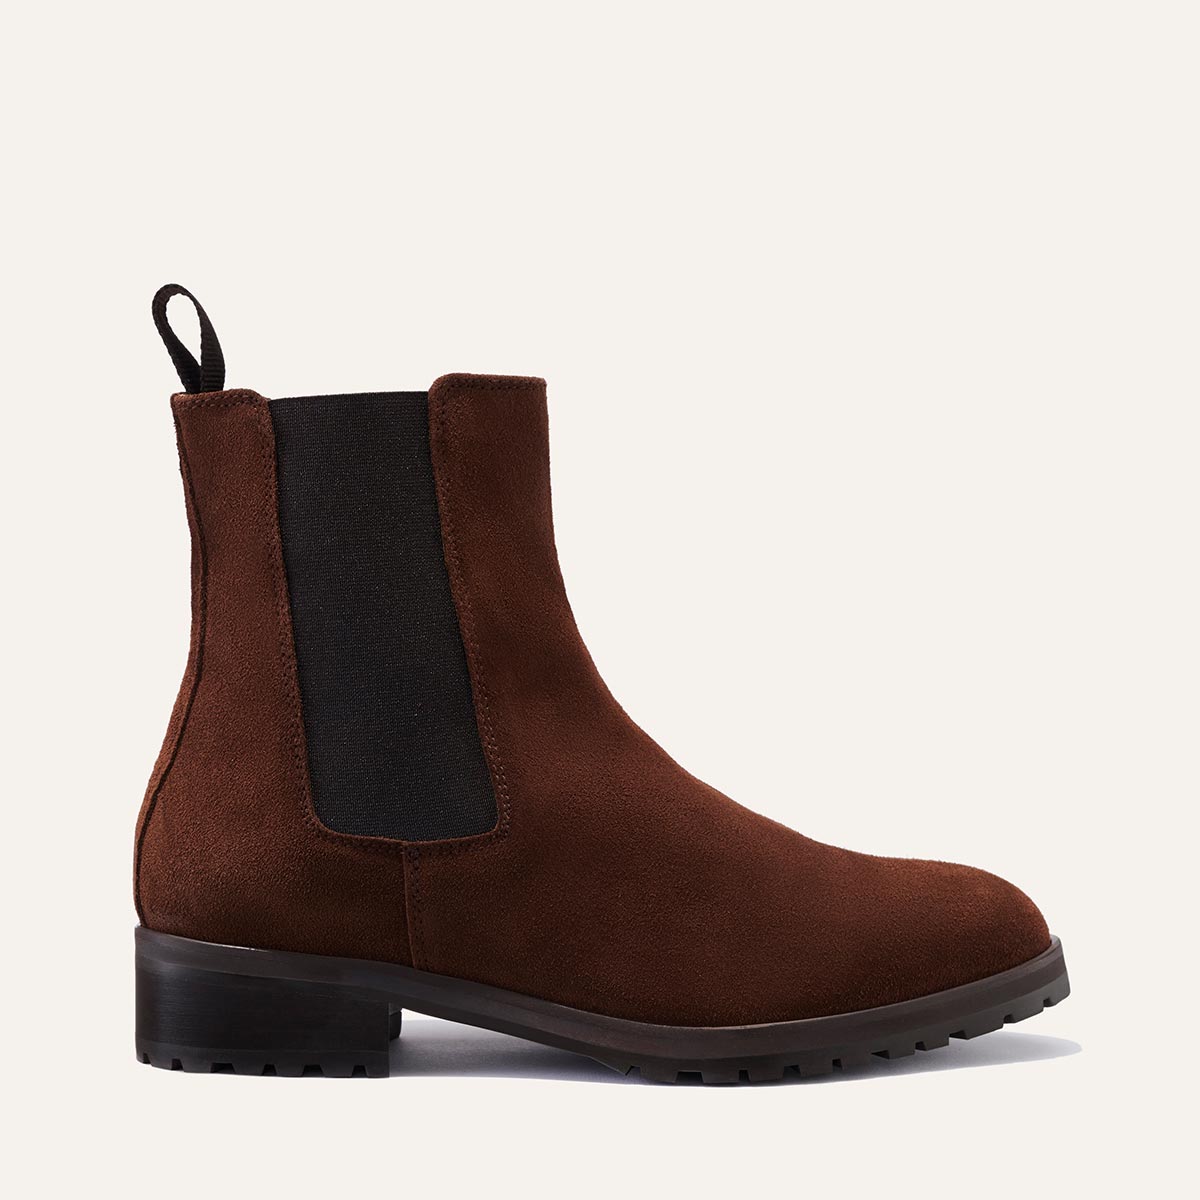 Margaux's Chelsea Boot in brown water-resistant suede with a rubber lug sole